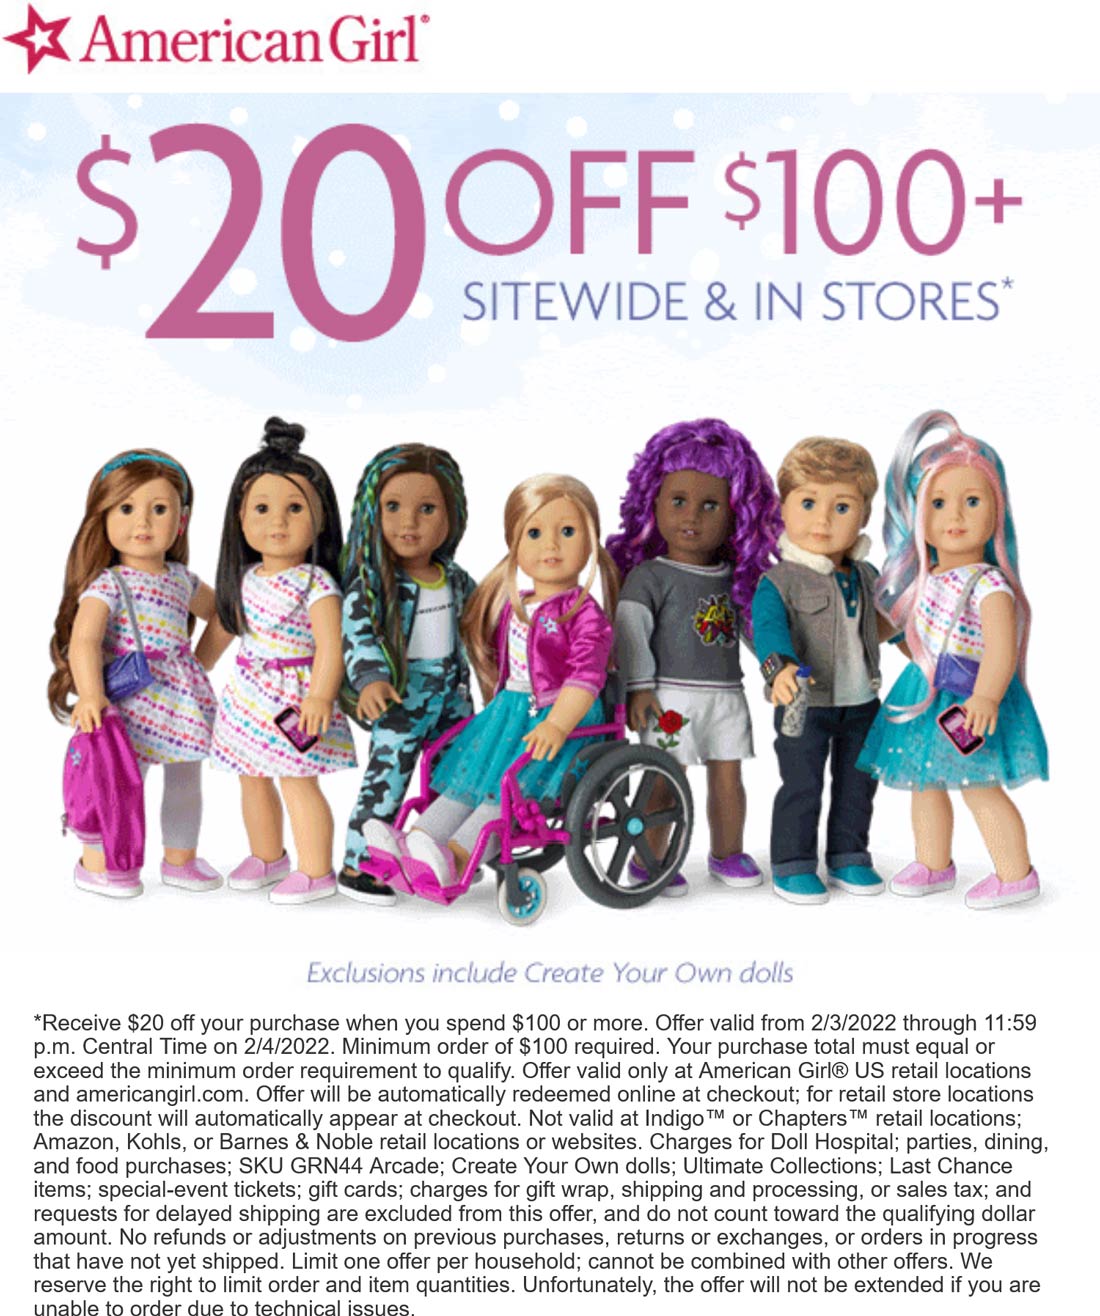 American Girl stores Coupon  $20 off $100 today at American Girl doll stores, ditto online #americangirl 